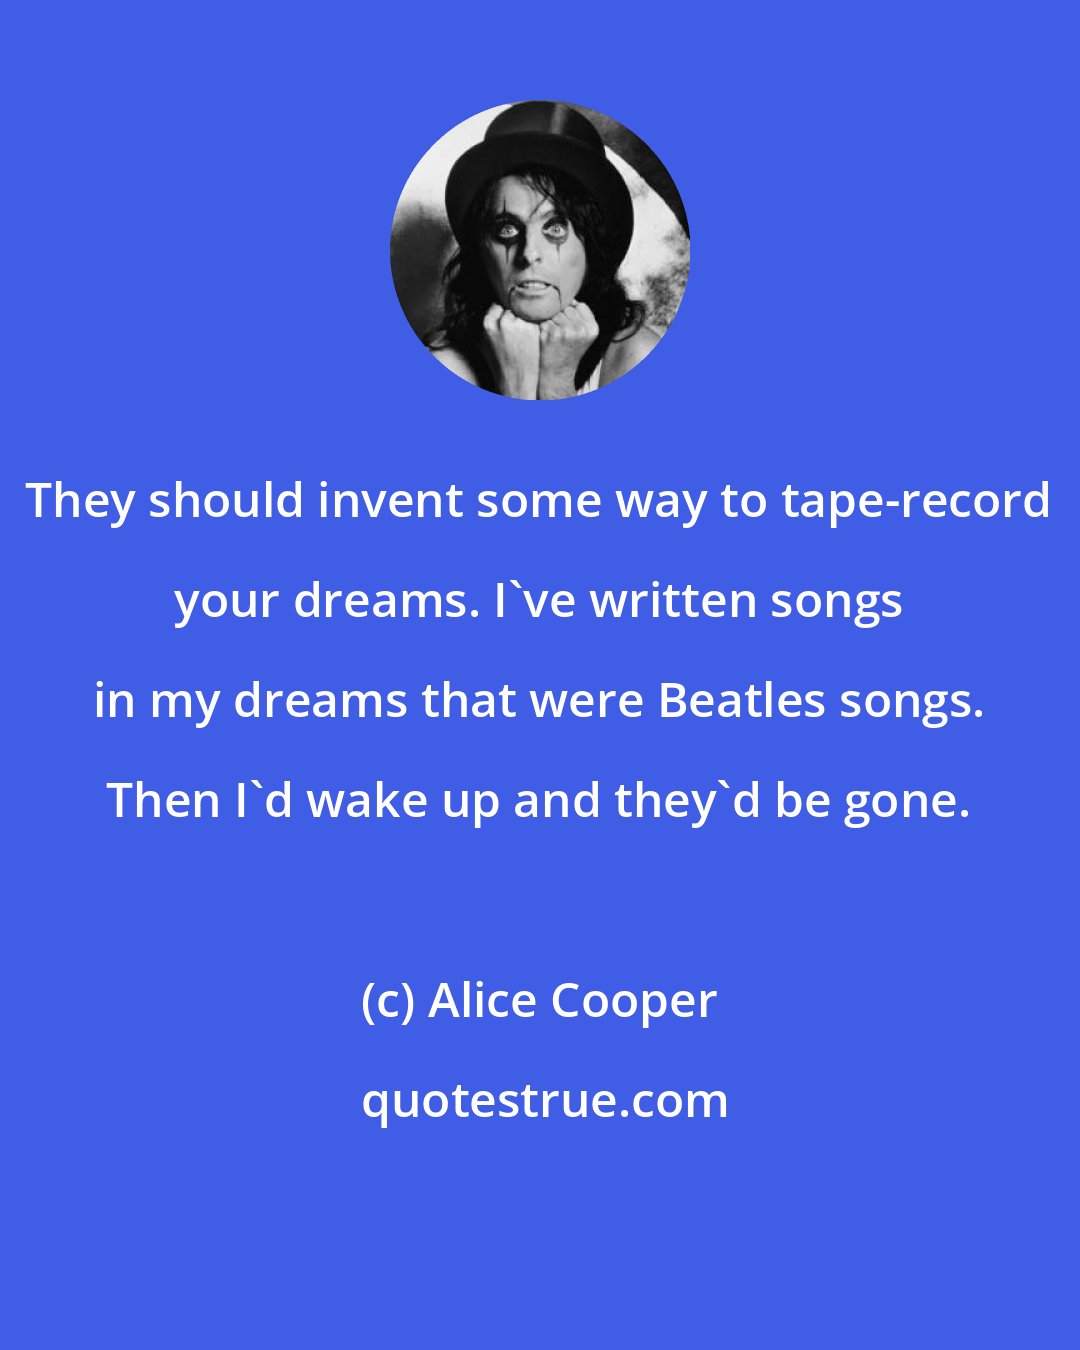 Alice Cooper: They should invent some way to tape-record your dreams. I've written songs in my dreams that were Beatles songs. Then I'd wake up and they'd be gone.